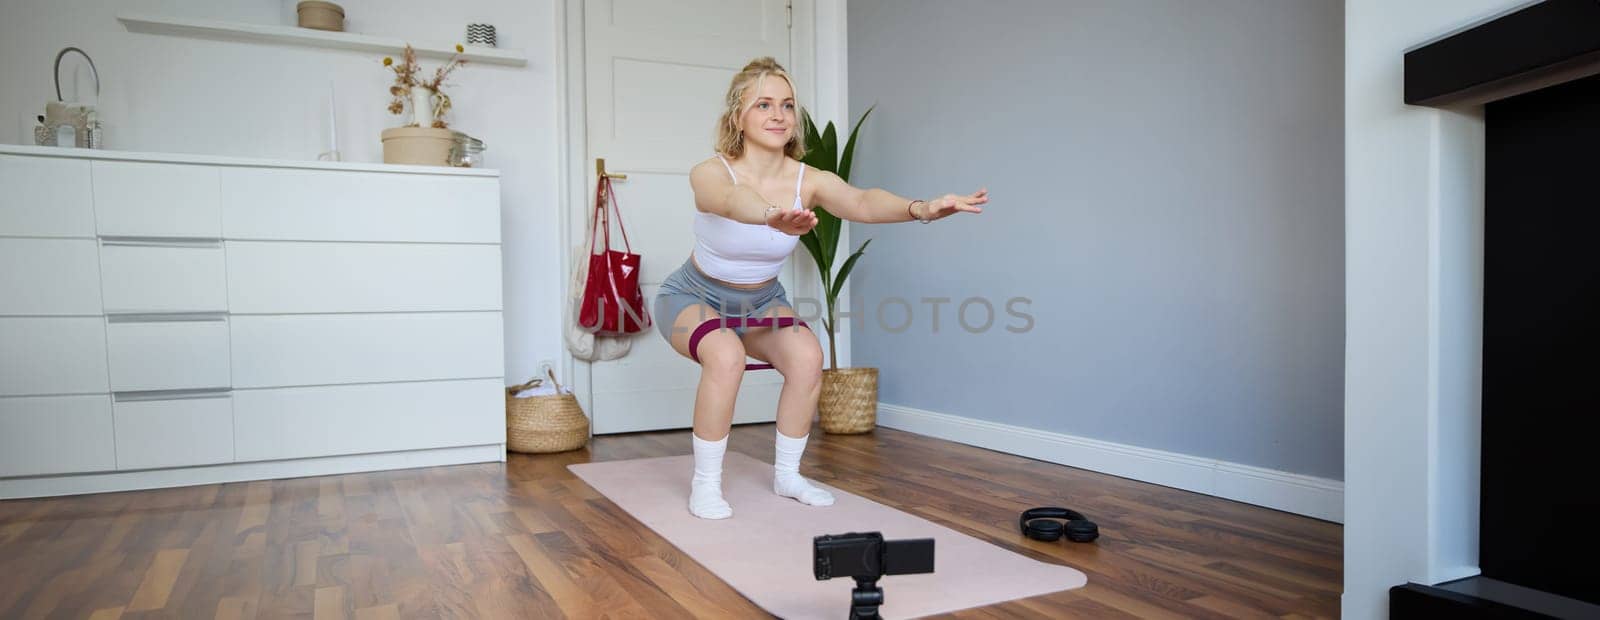 Portrait of woman, fitness instructor at home, recording video about workout, showing how to do leg exercises, squats with elastic resistance band, working out indoors on yoga mat.